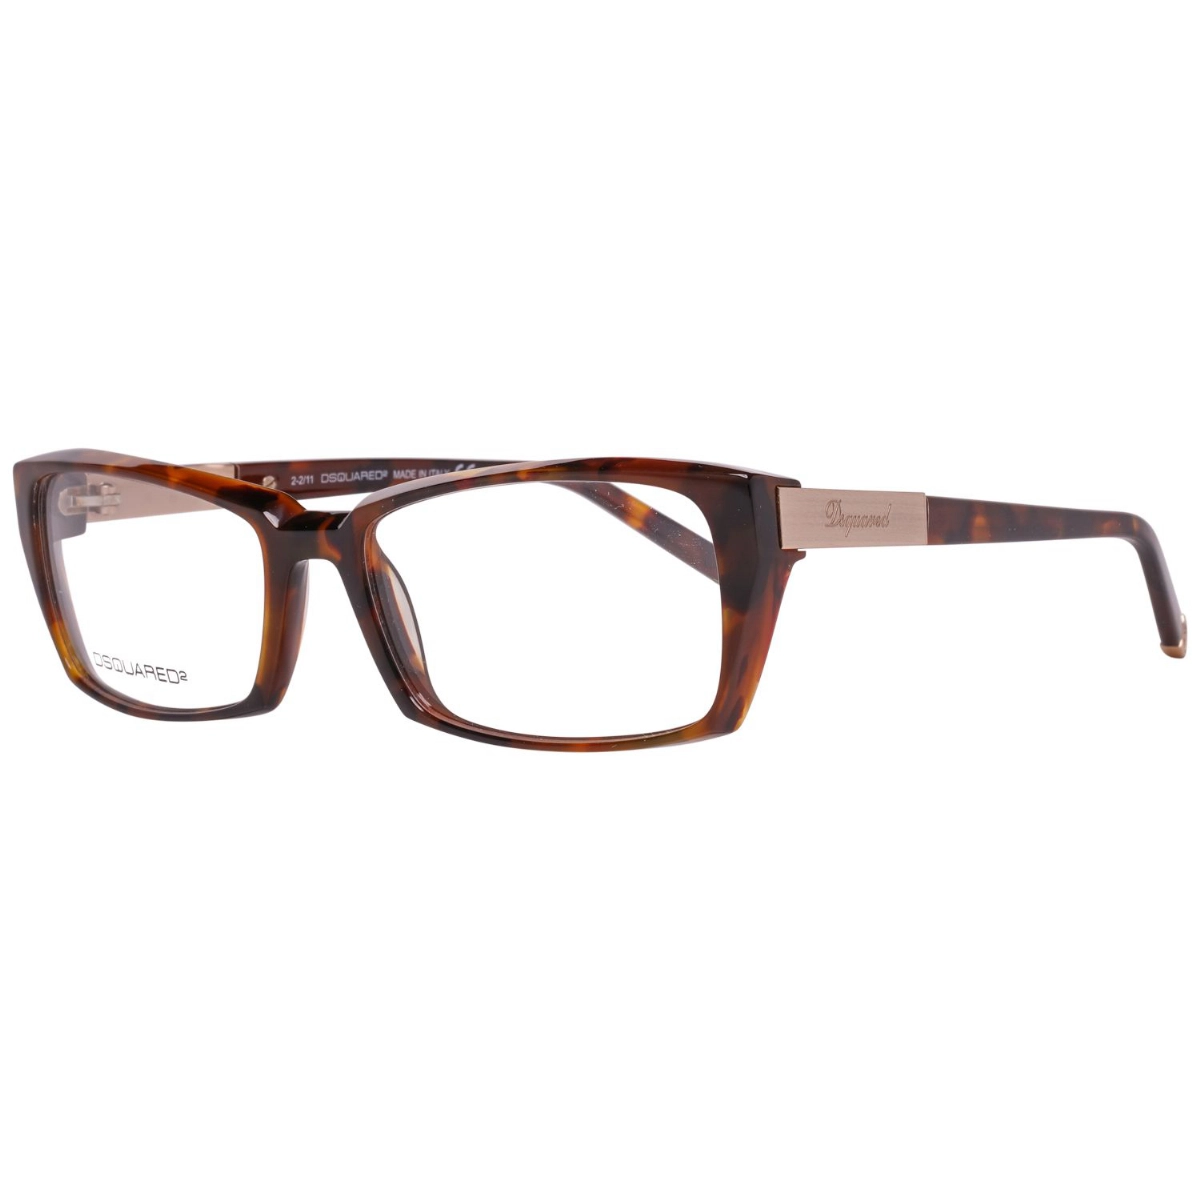 GLASSES FOR WOMAN DSQUARED2 DQ5046-052-54